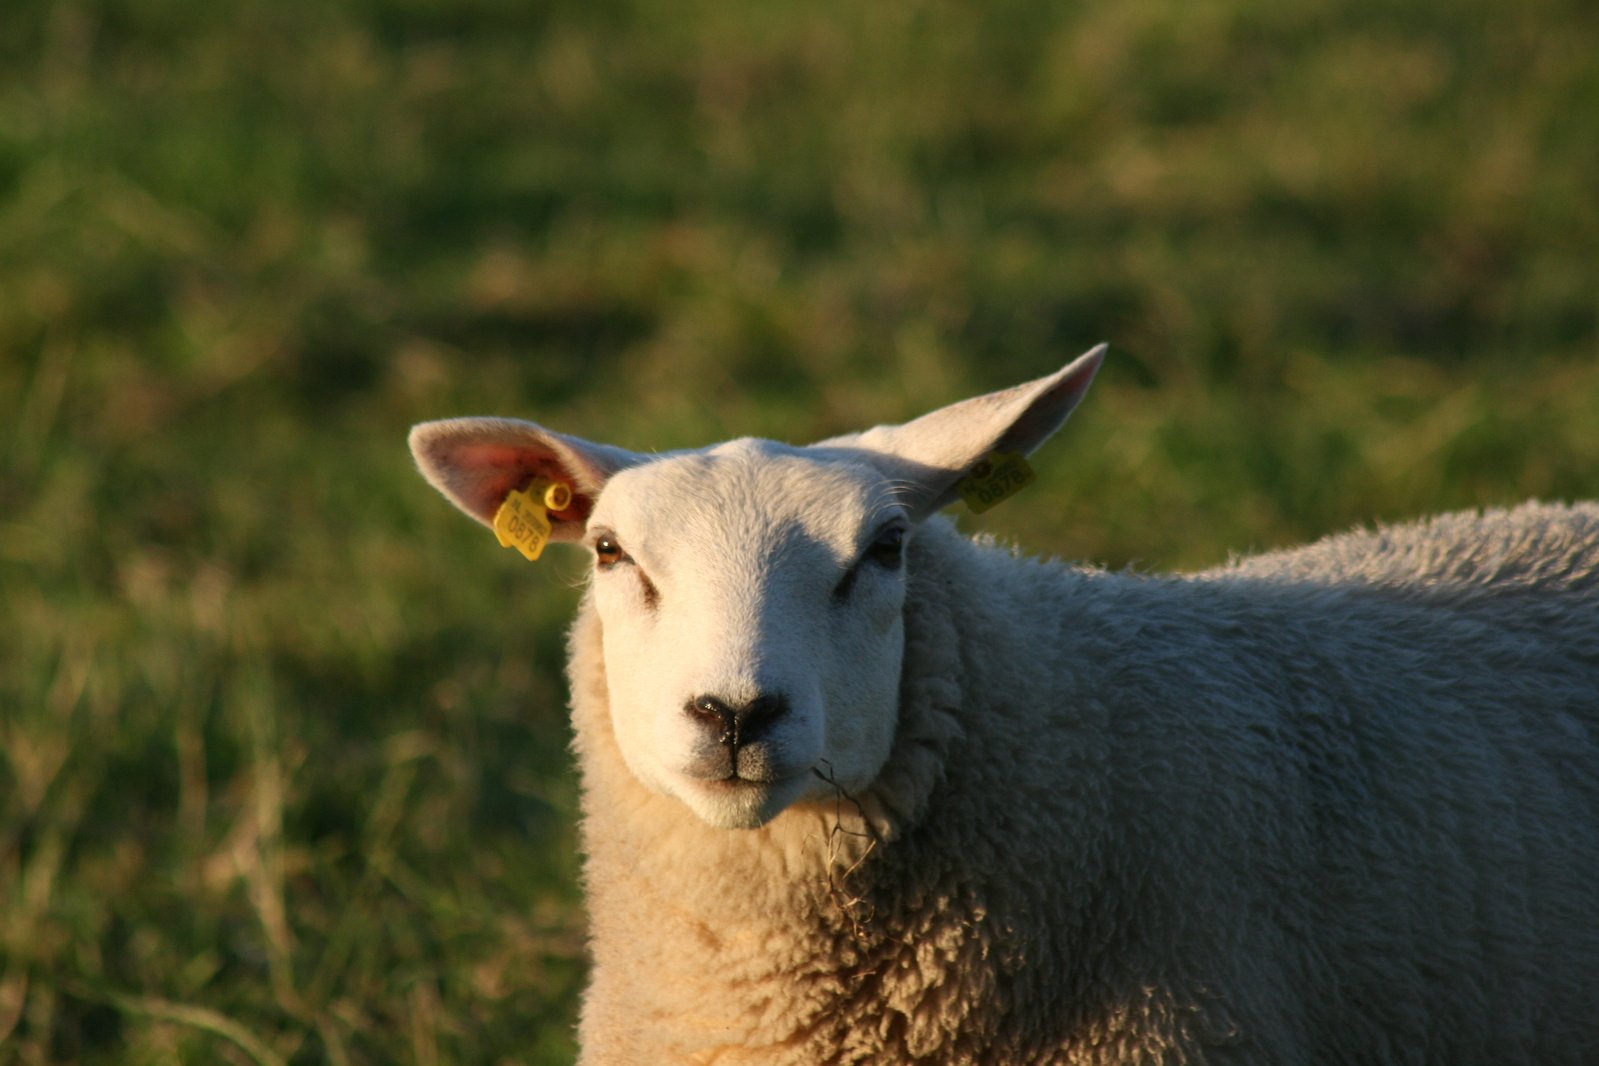 the sheep with a white face looks at the camera